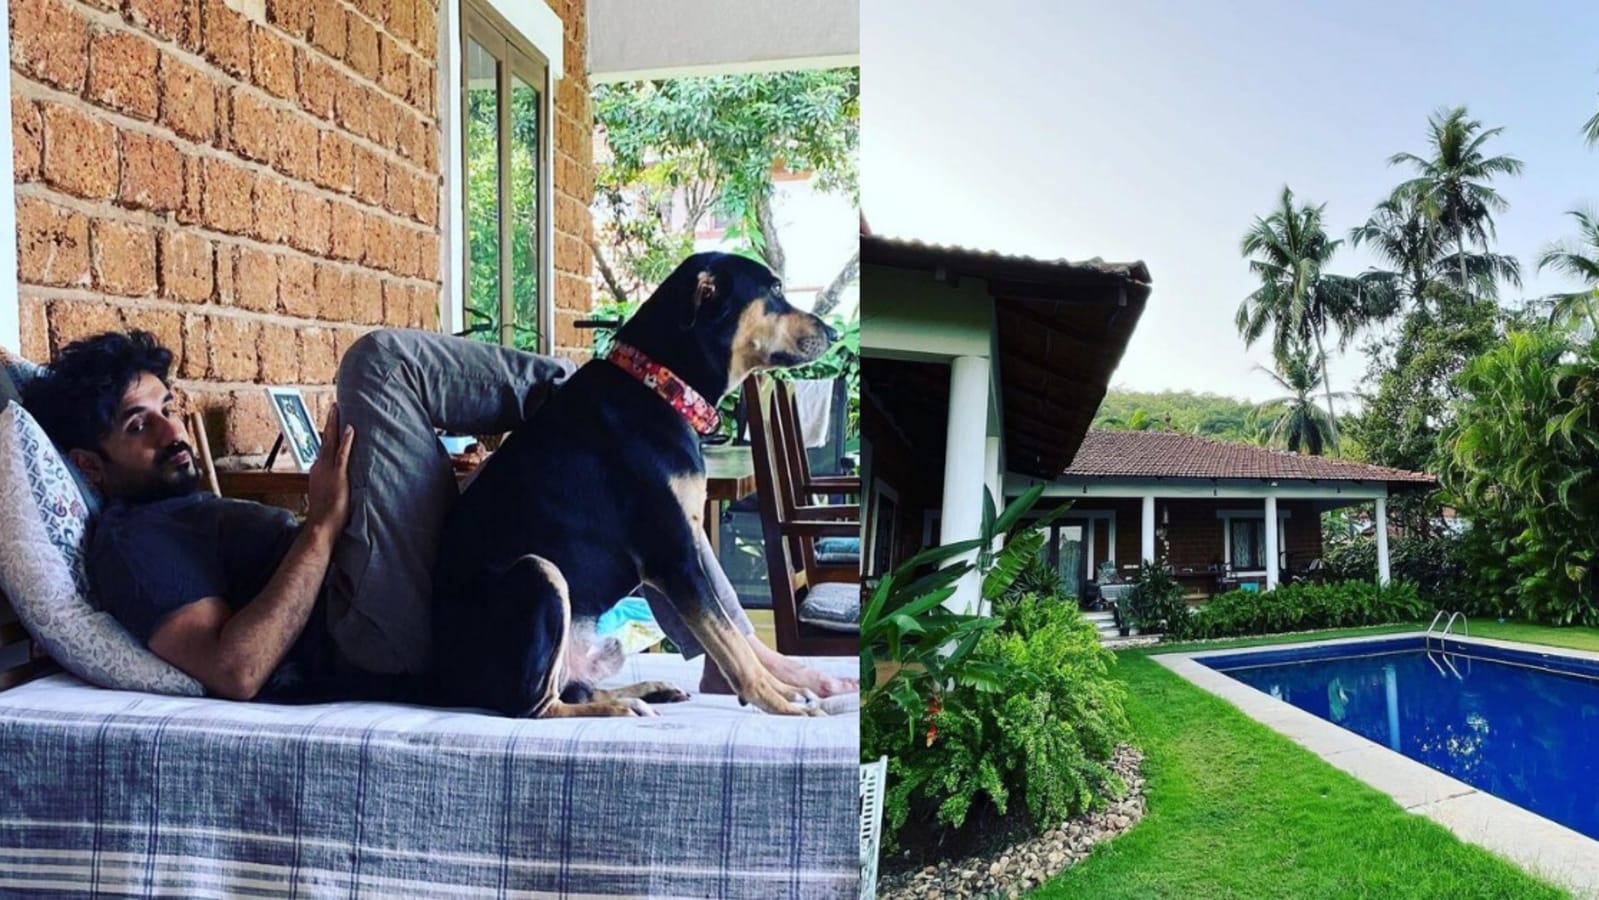 Vir Das gives a view of his scenic ‘home’ as he chills with his pets, fans say ‘wow, what a luxurious life’. See pics